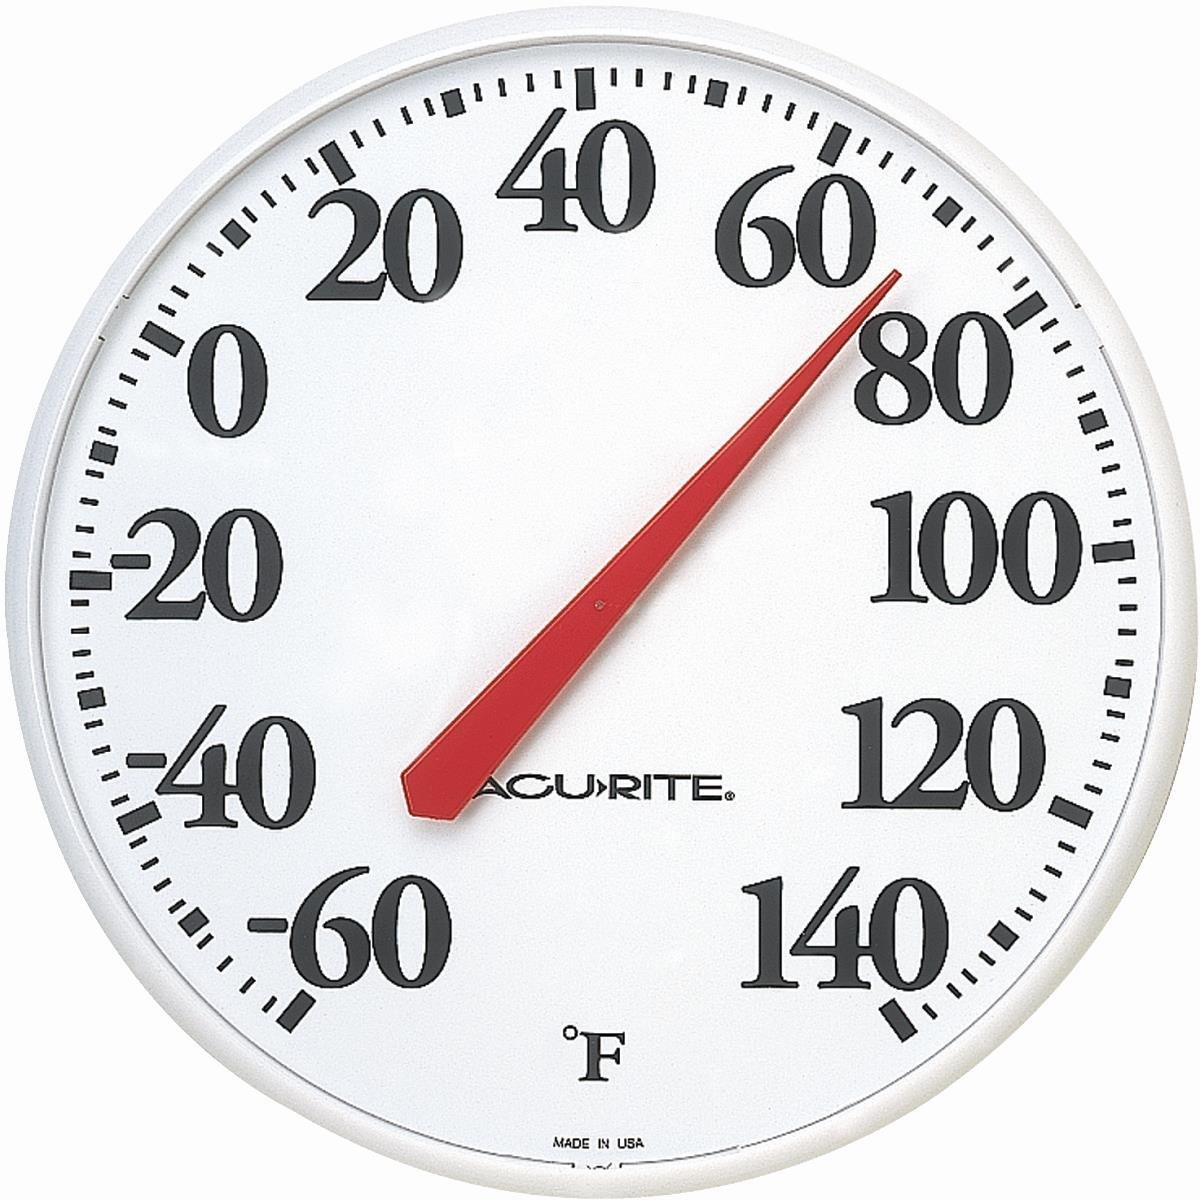 Essential Wall Thermometer - Silver 12 in.